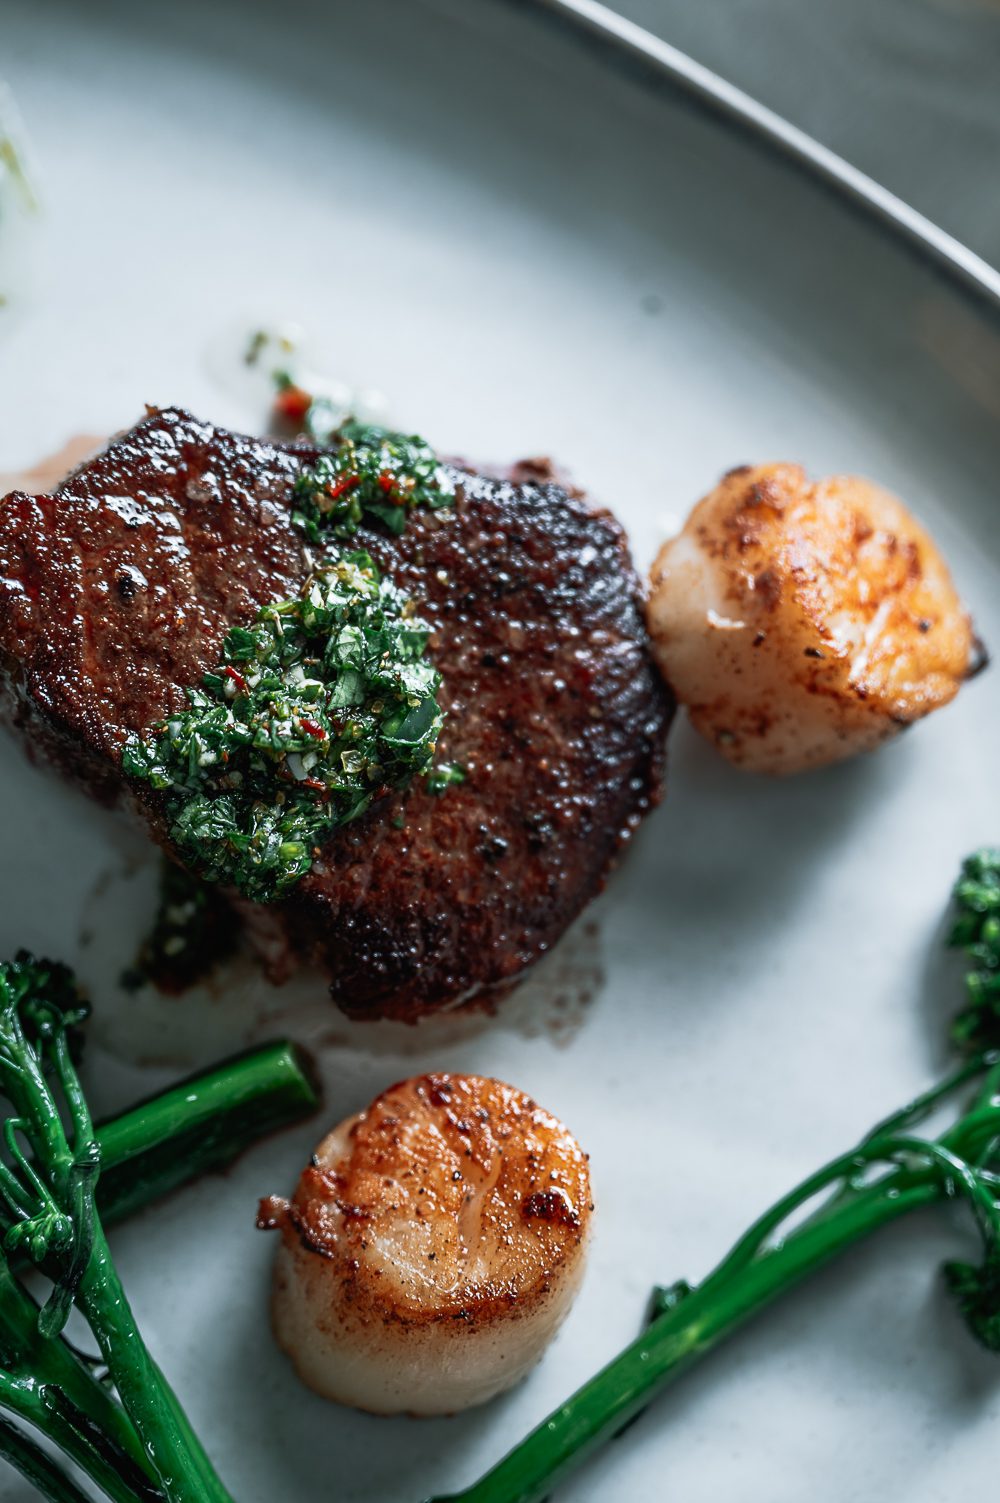 A Surf And Turf Recipe Perfect For Valentine's Day!